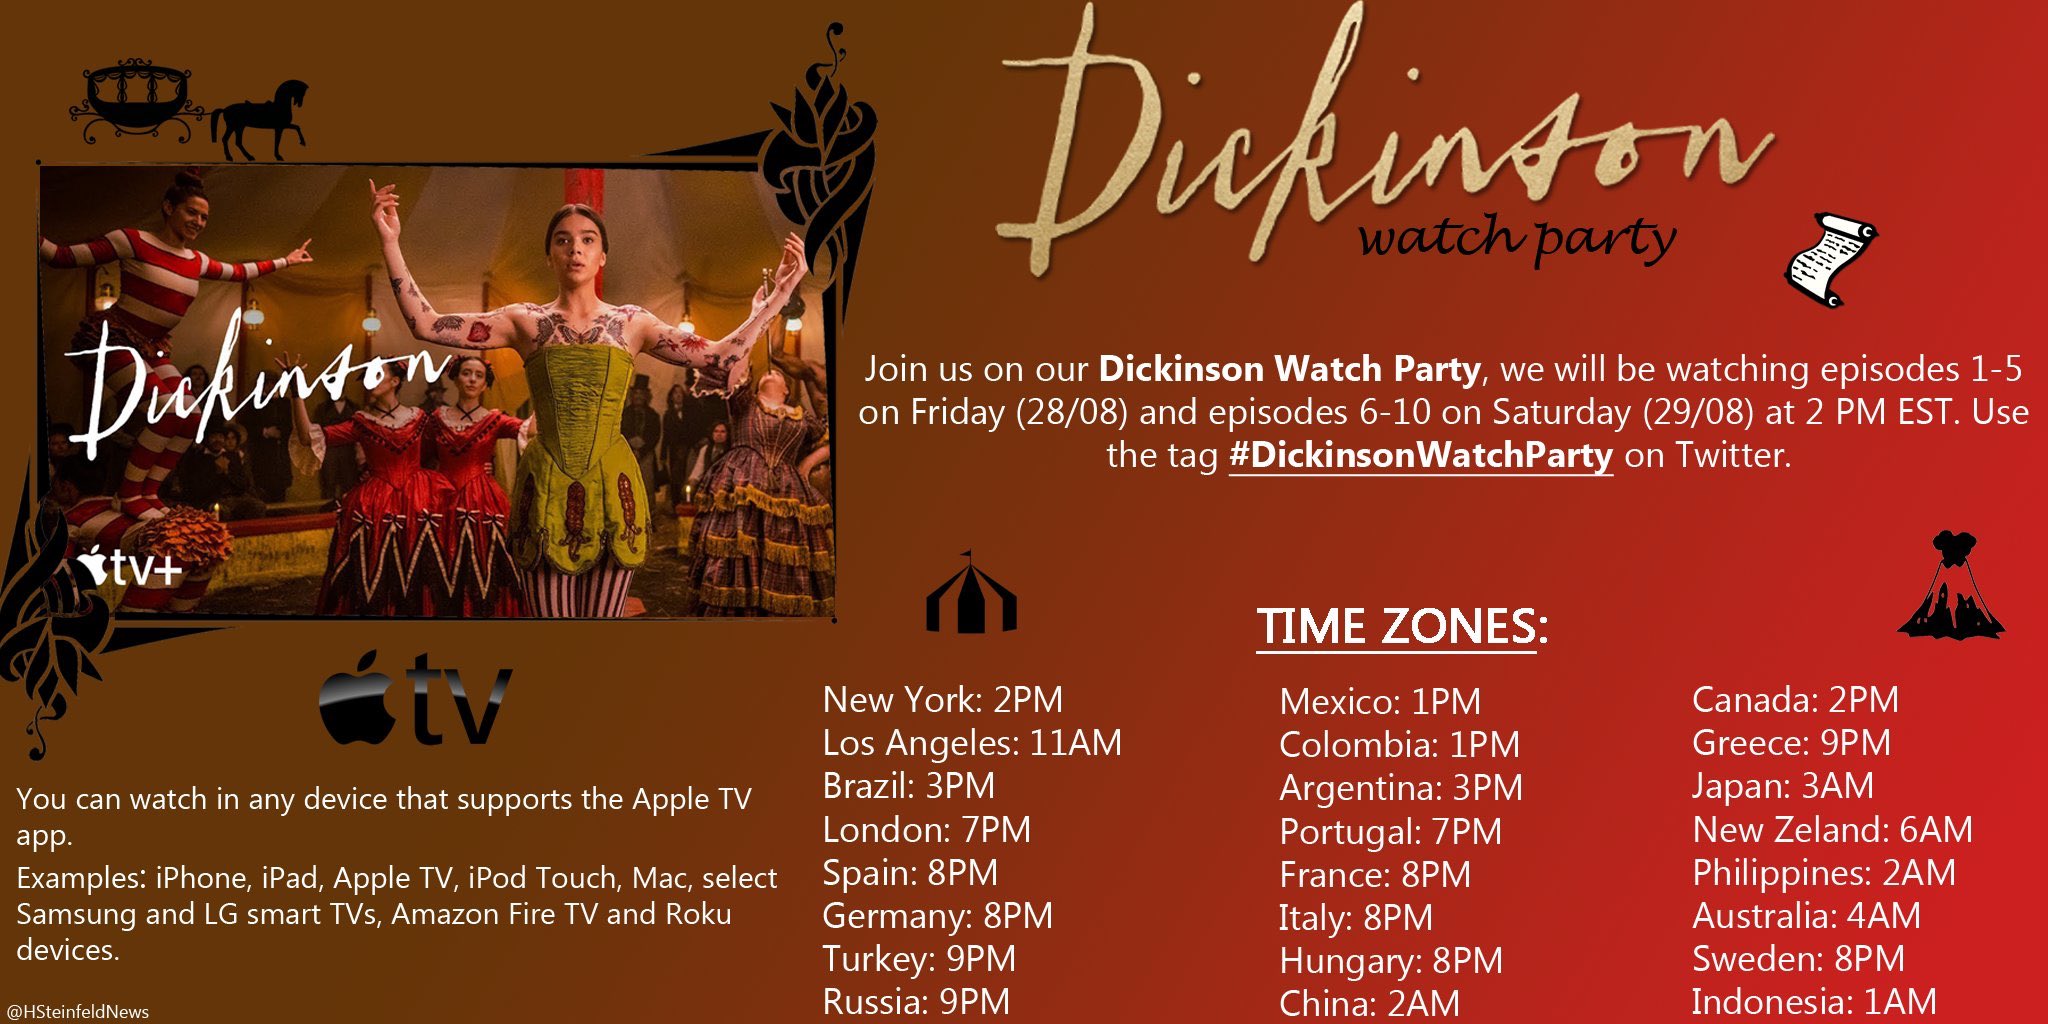 Hailee Steinfeld News on Twitter: "× DICKINSON WATCH PARTY × » Join on our watch party tomorrow as we continue to watch episodes 1x06 – 1x10 at 2PM EST! Use the